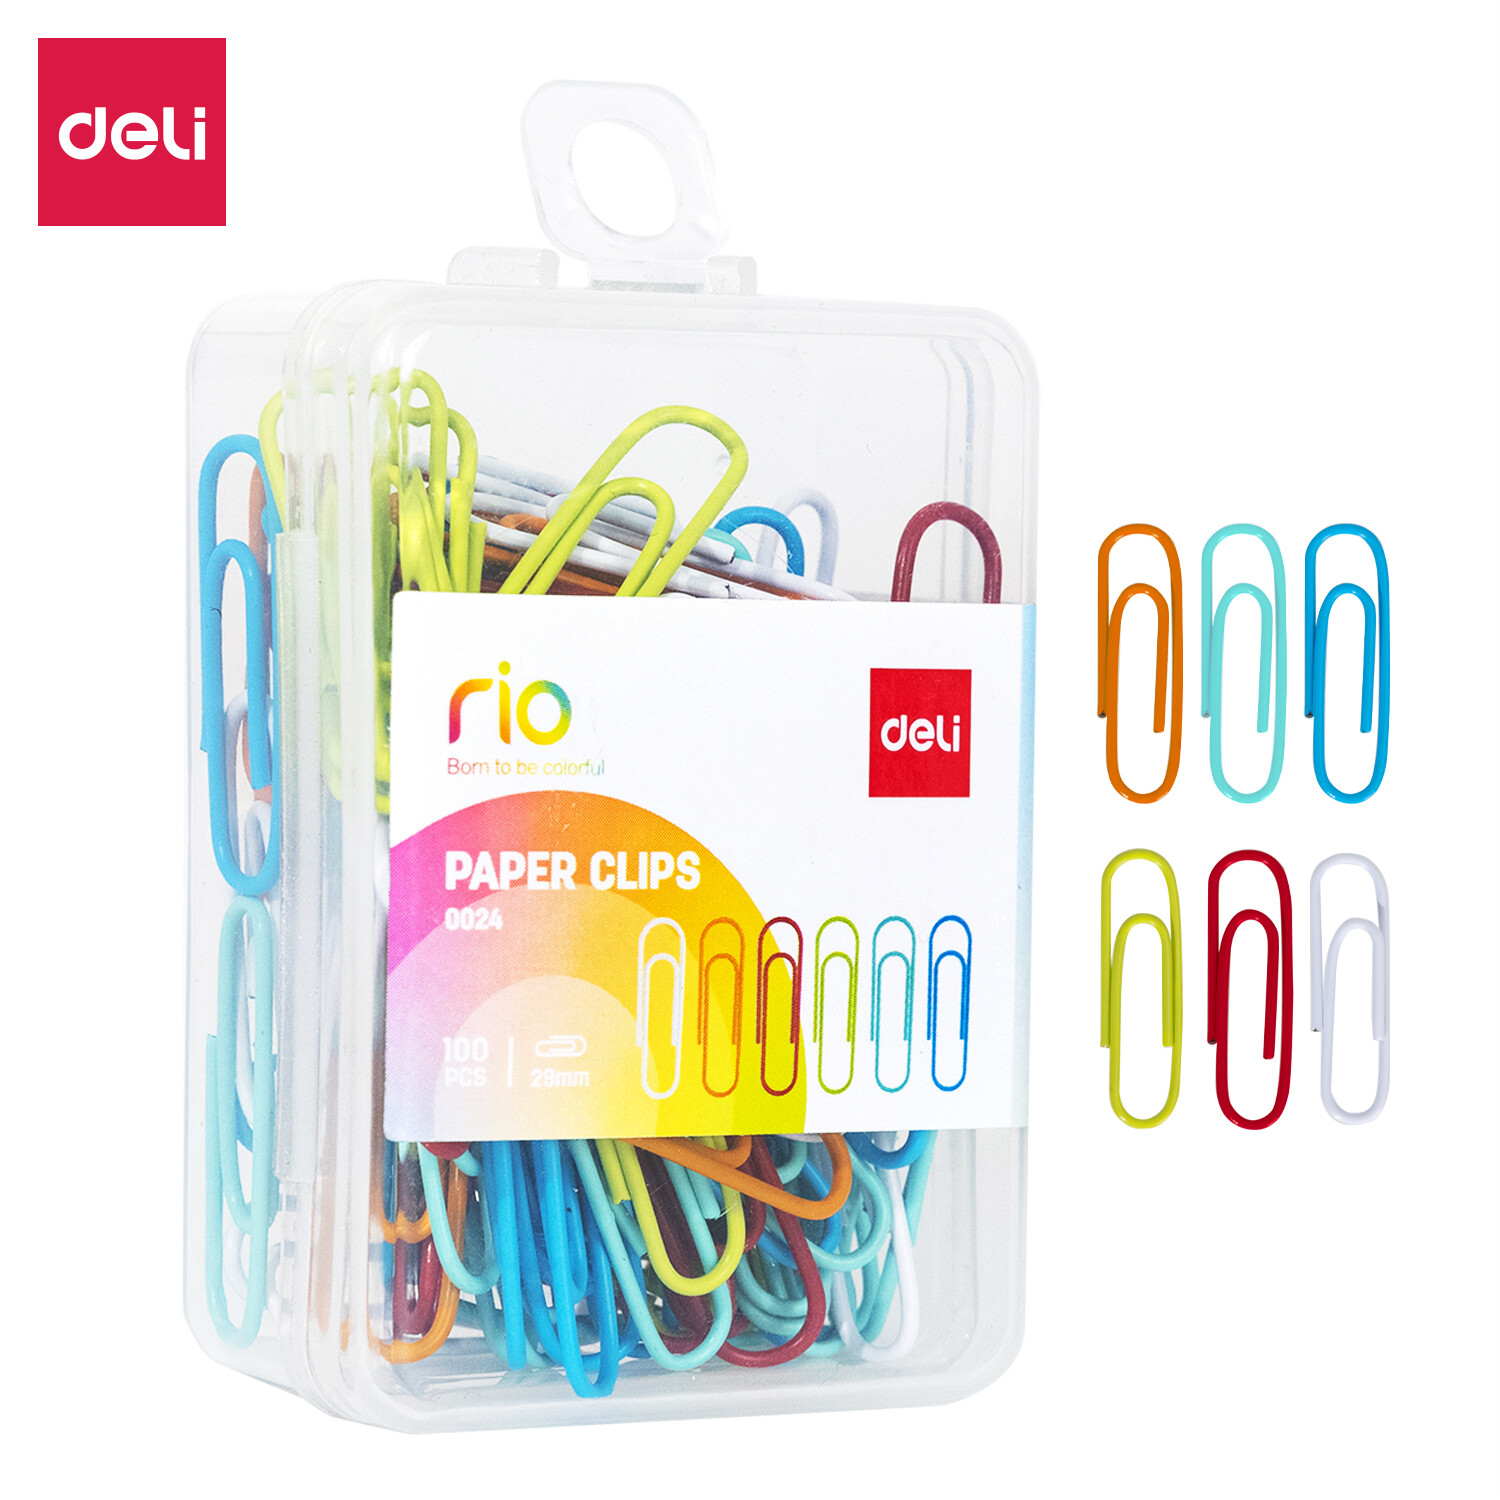 DELI ColorClips: Fun & Functional Paper Clips (29mm - 100 Pack) E0024